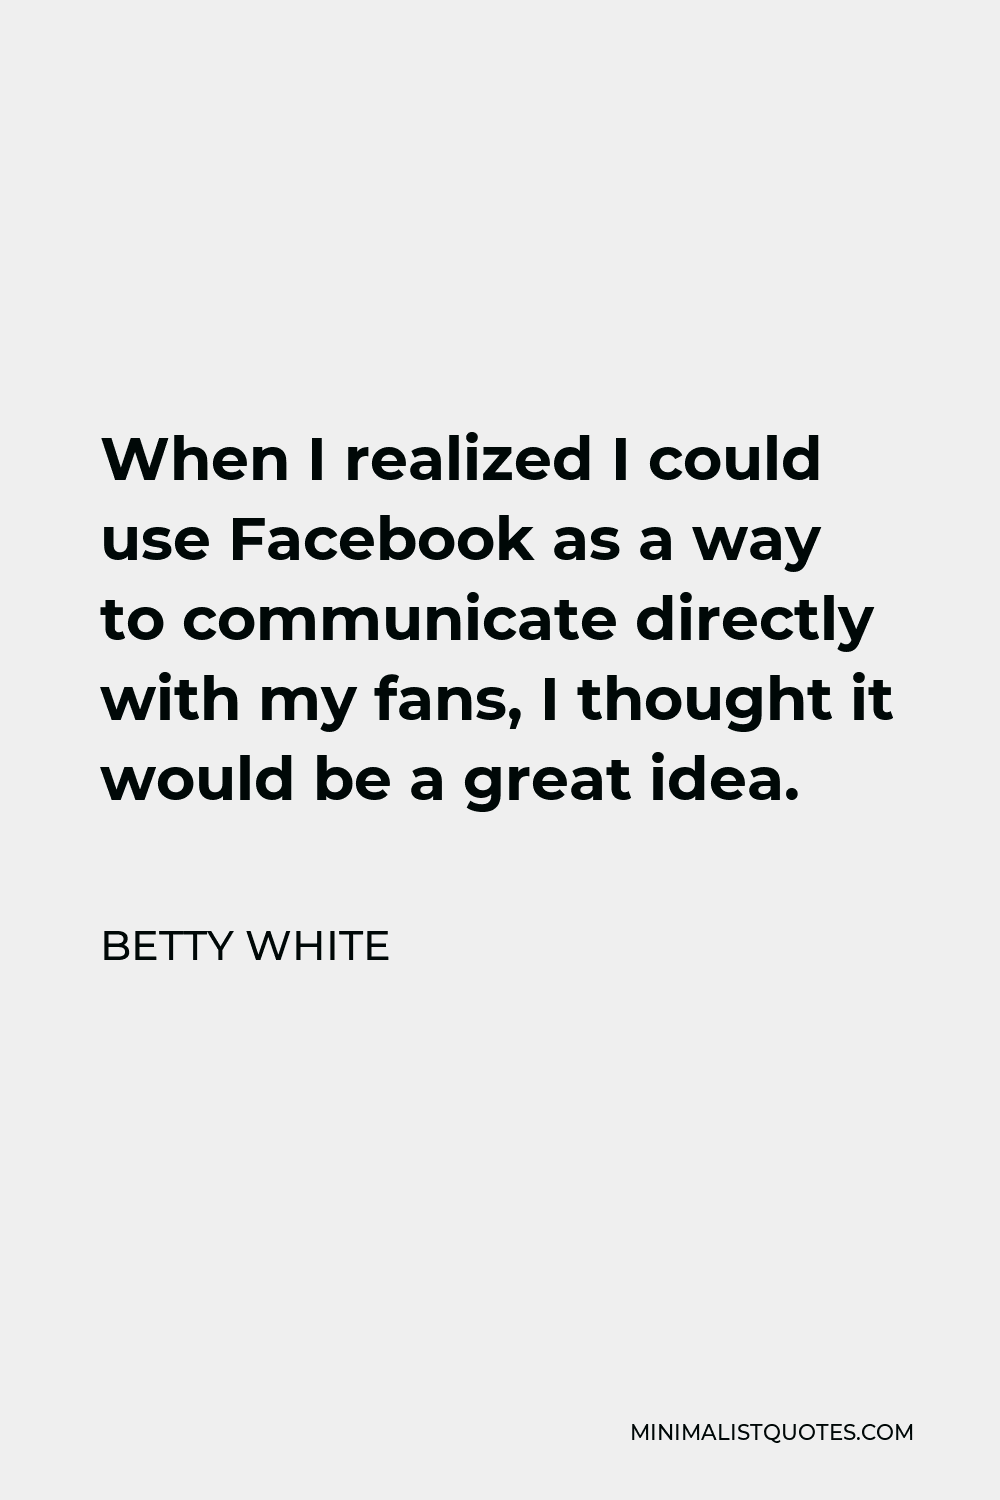 Betty White Quote - When I realized I could use Facebook as a way to communicate directly with my fans, I thought it would be a great idea.